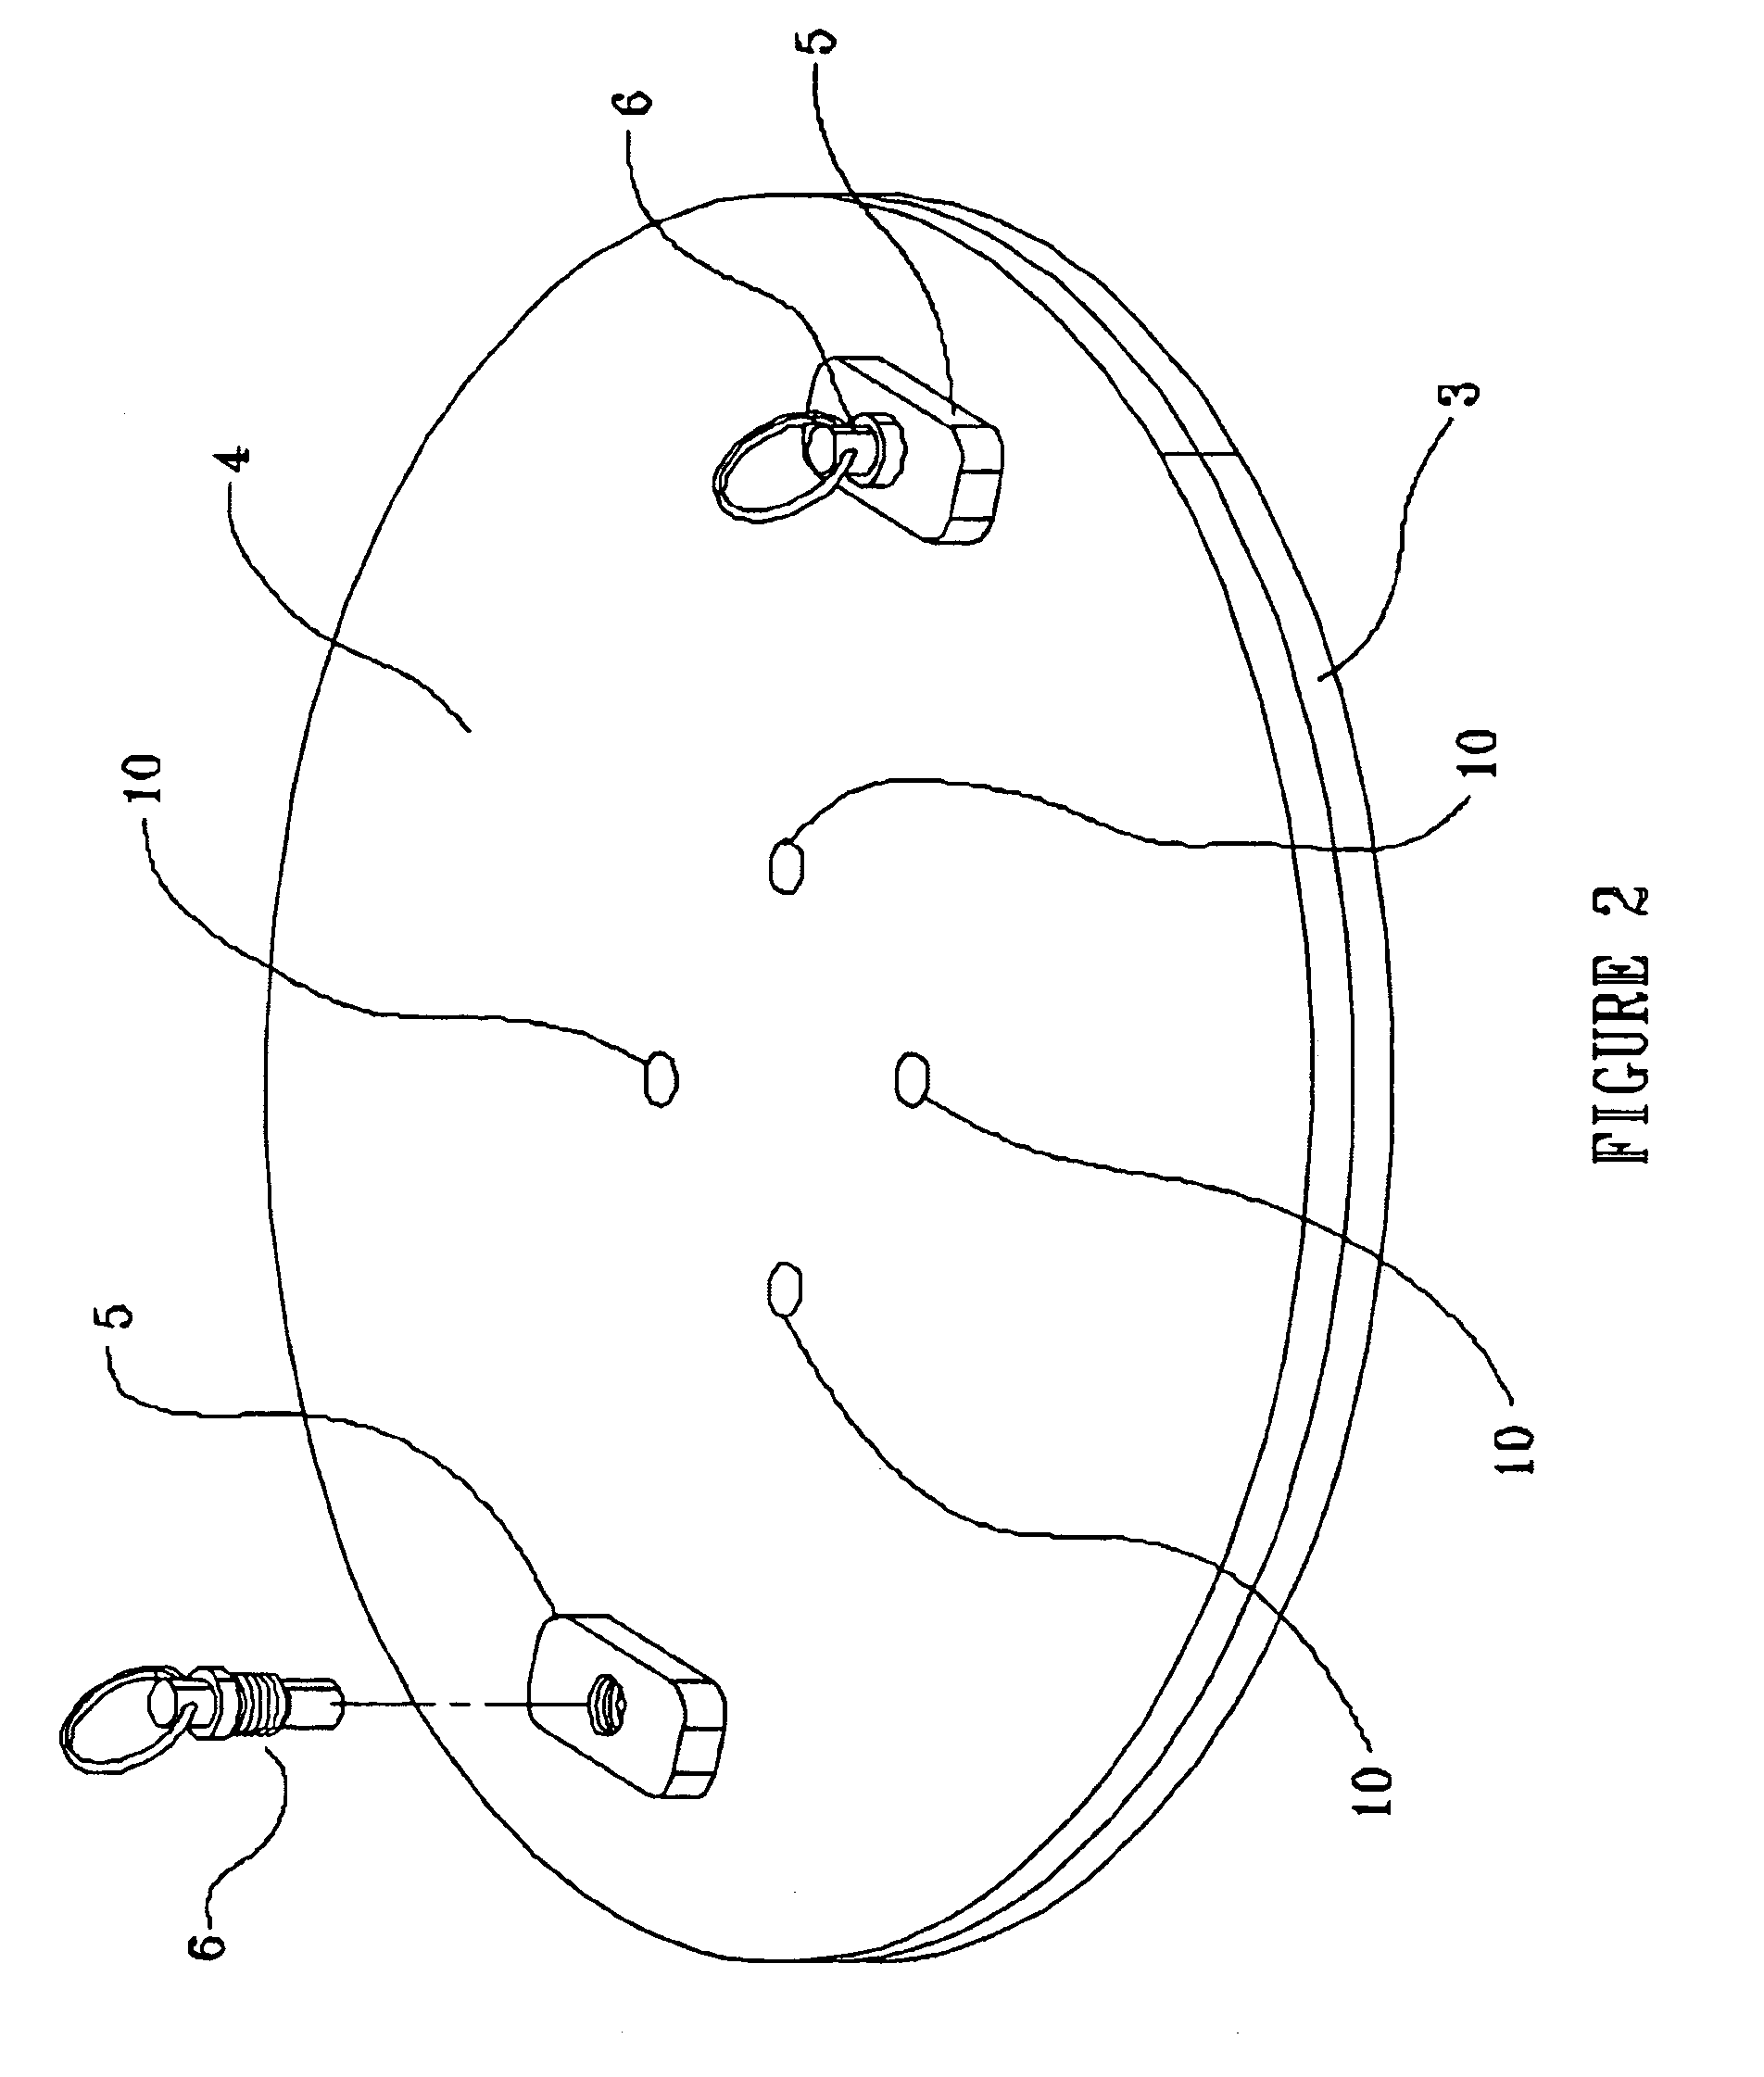 Rotatable binding apparatus for a snowboard